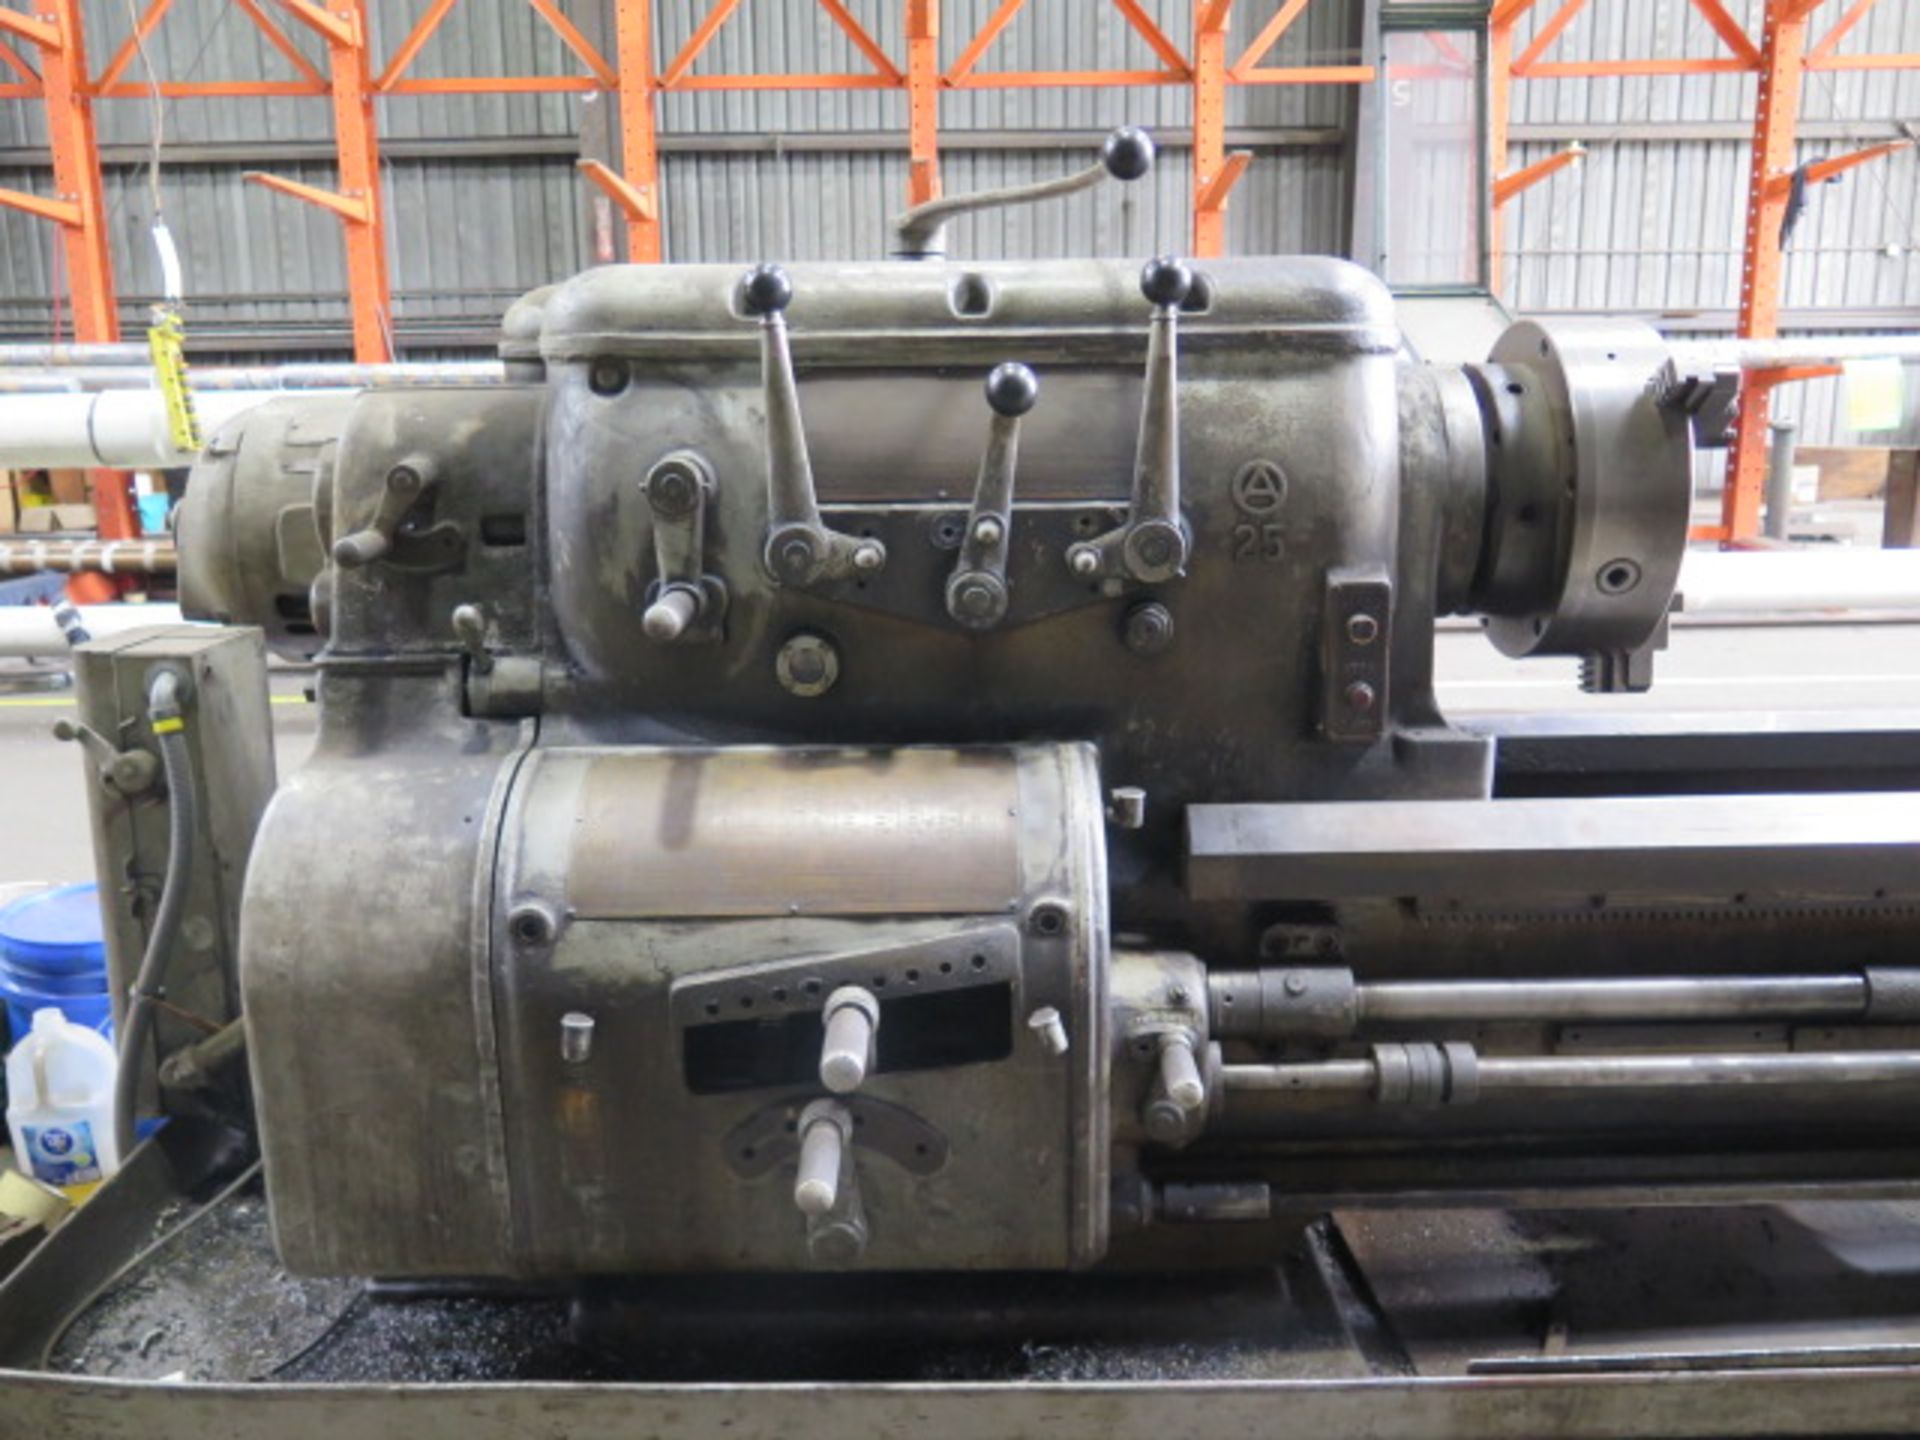 Axelson 25 28” x 216” Geared Head Lathe w/ 24’ Bed, 8-555 RPM,Taper Attachment, Tailstock,SOLD AS IS - Image 4 of 12